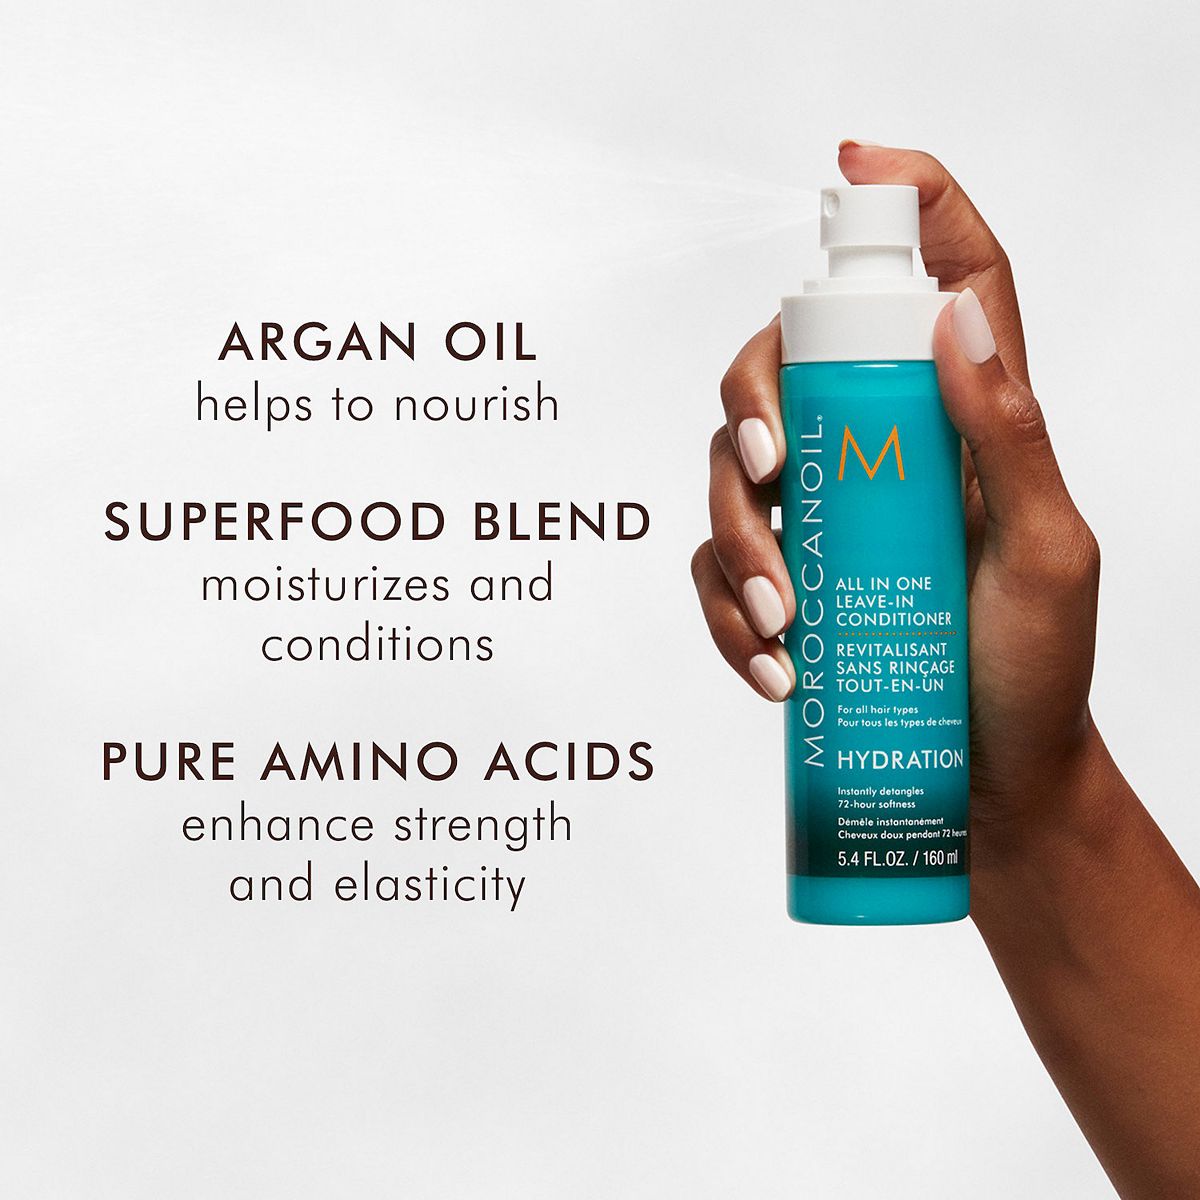 All in One Leave-In Conditioner - Travel | Moroccanoil